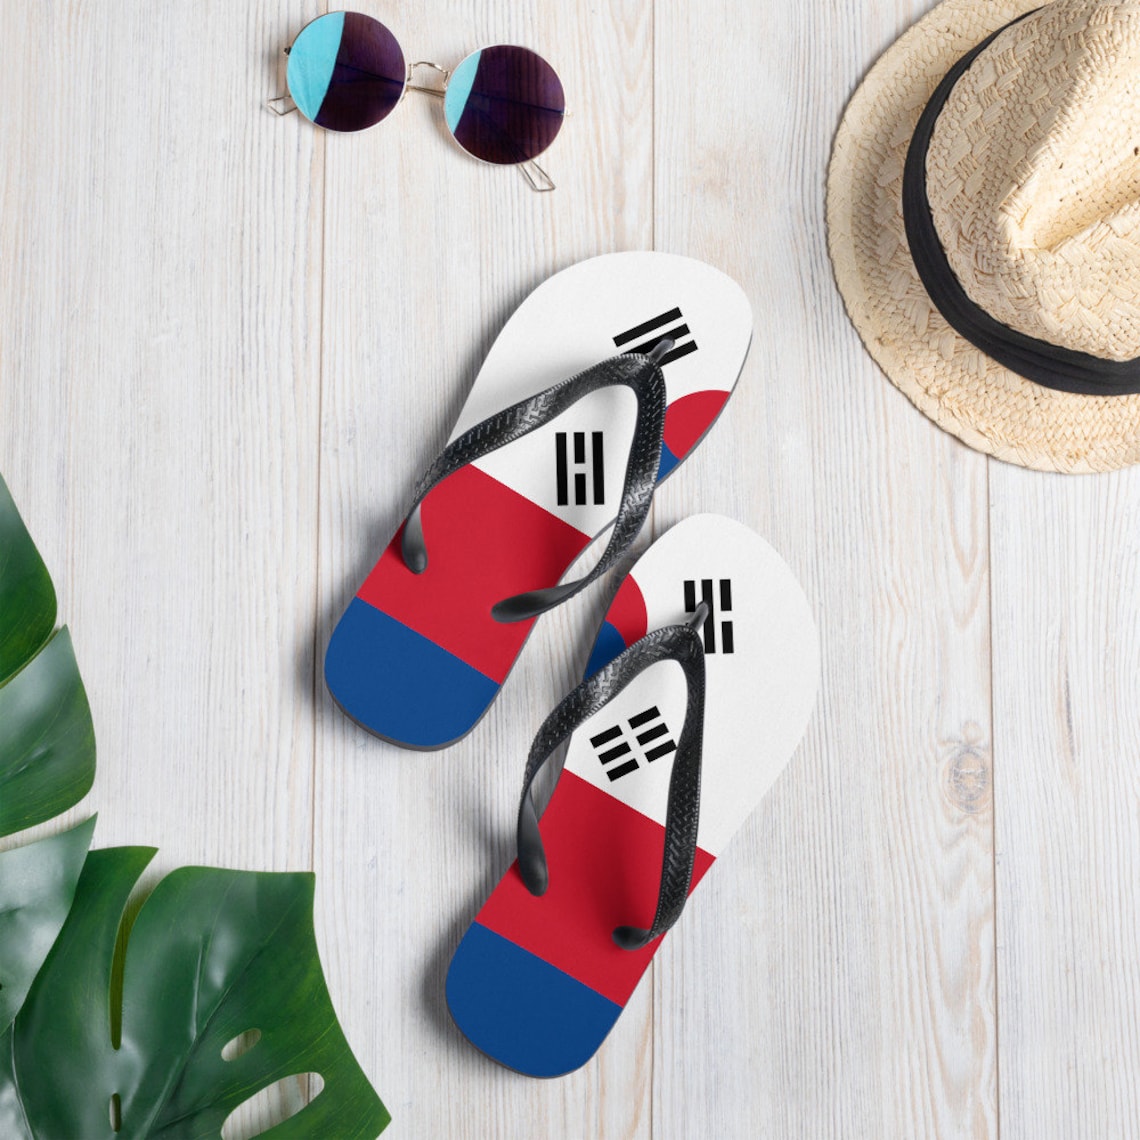 Flip Flop Shop: These funky fly Flag of Korea Inspired Flip Flops by Volleybragswag are a popular selling item in my ETSY shop! Korea volleyball fans..You know your assignment!!!